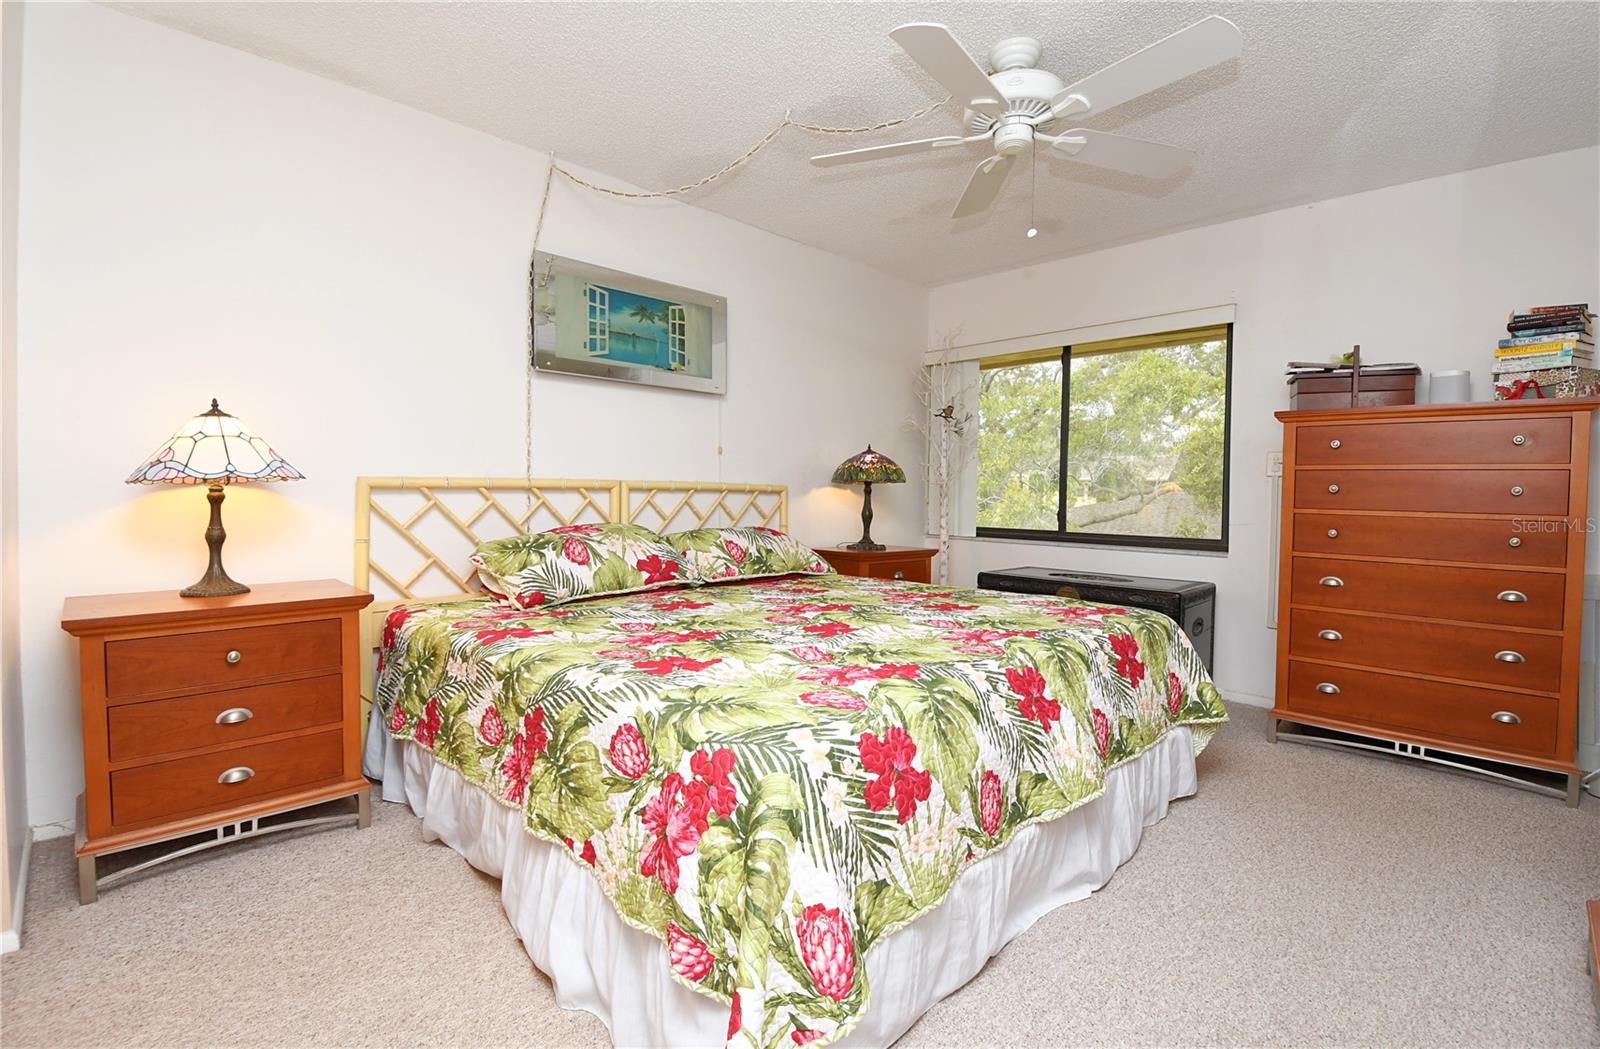 The master bedroom features a carpet, ceiling fan and a large window with hurricane shutters.